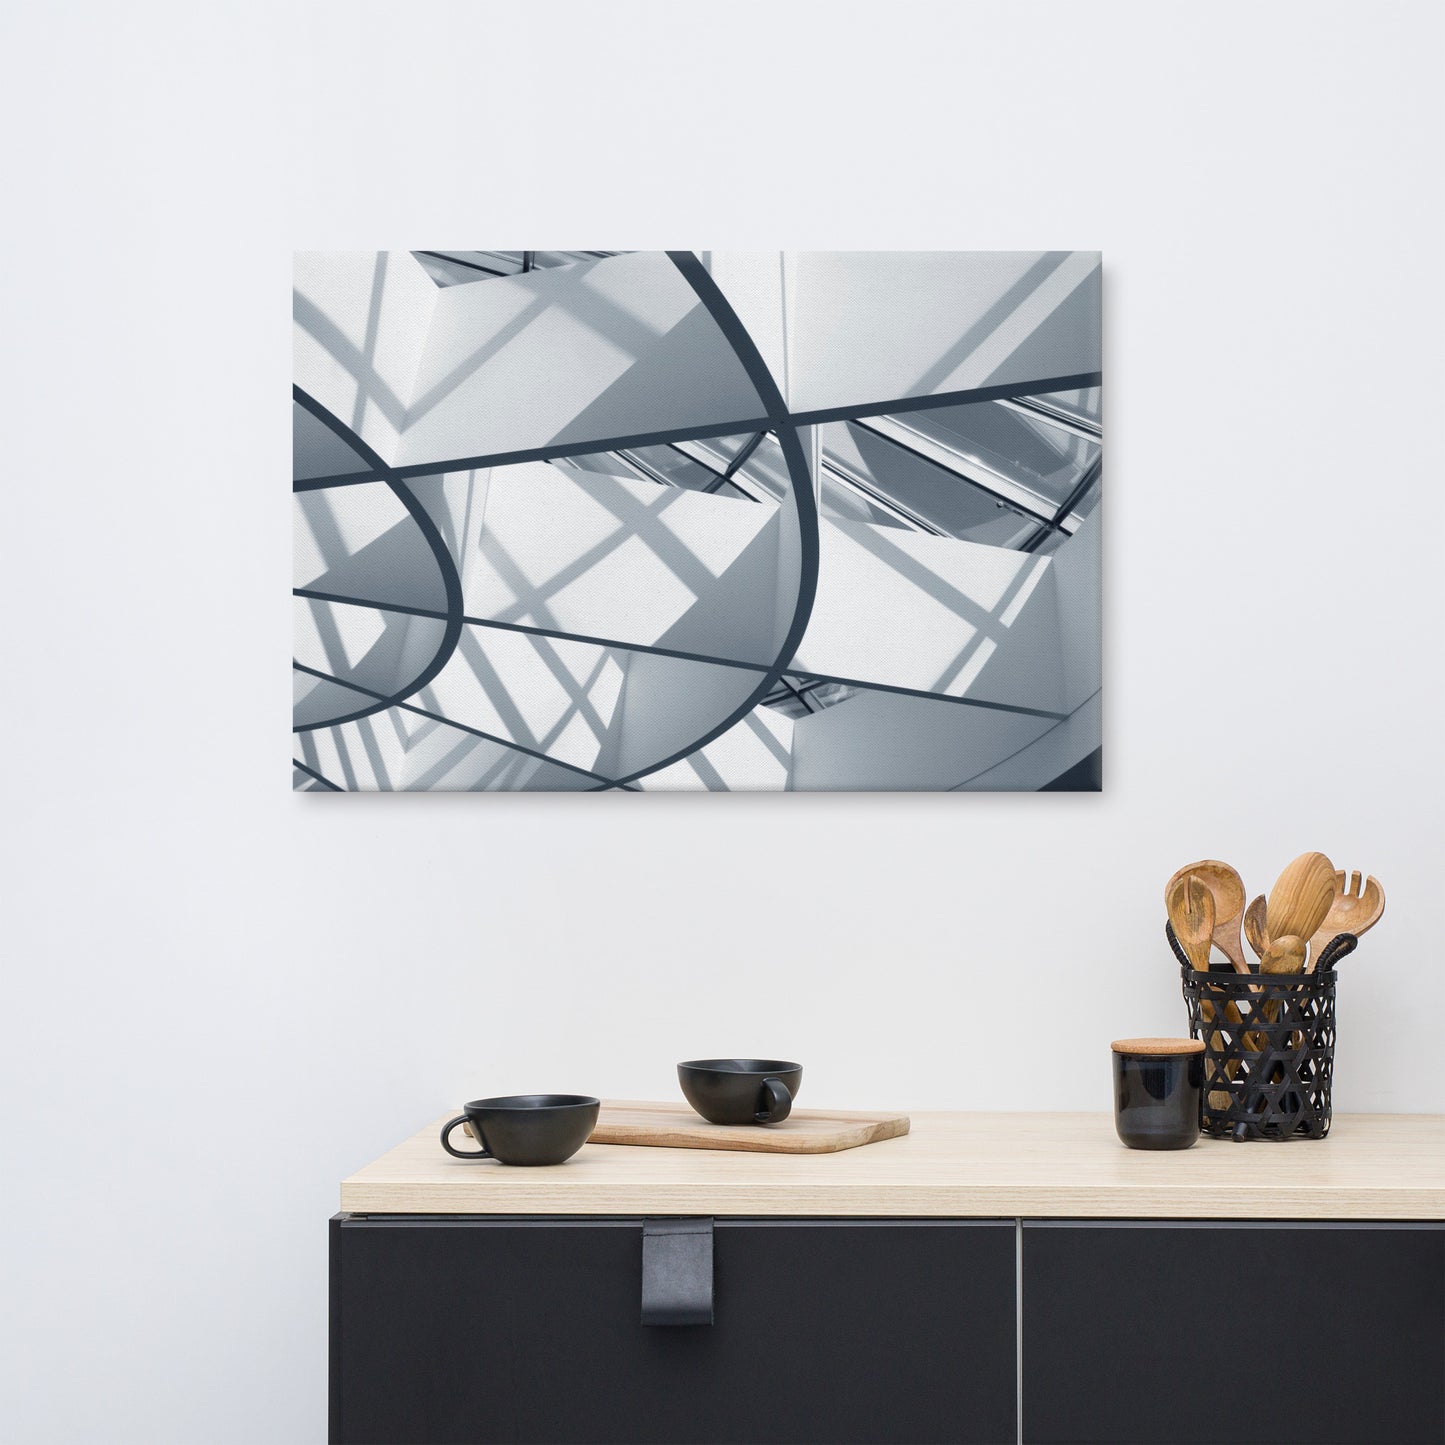 Interwoven Lines Colorized Architectural Photograph Canvas Wall Art Print